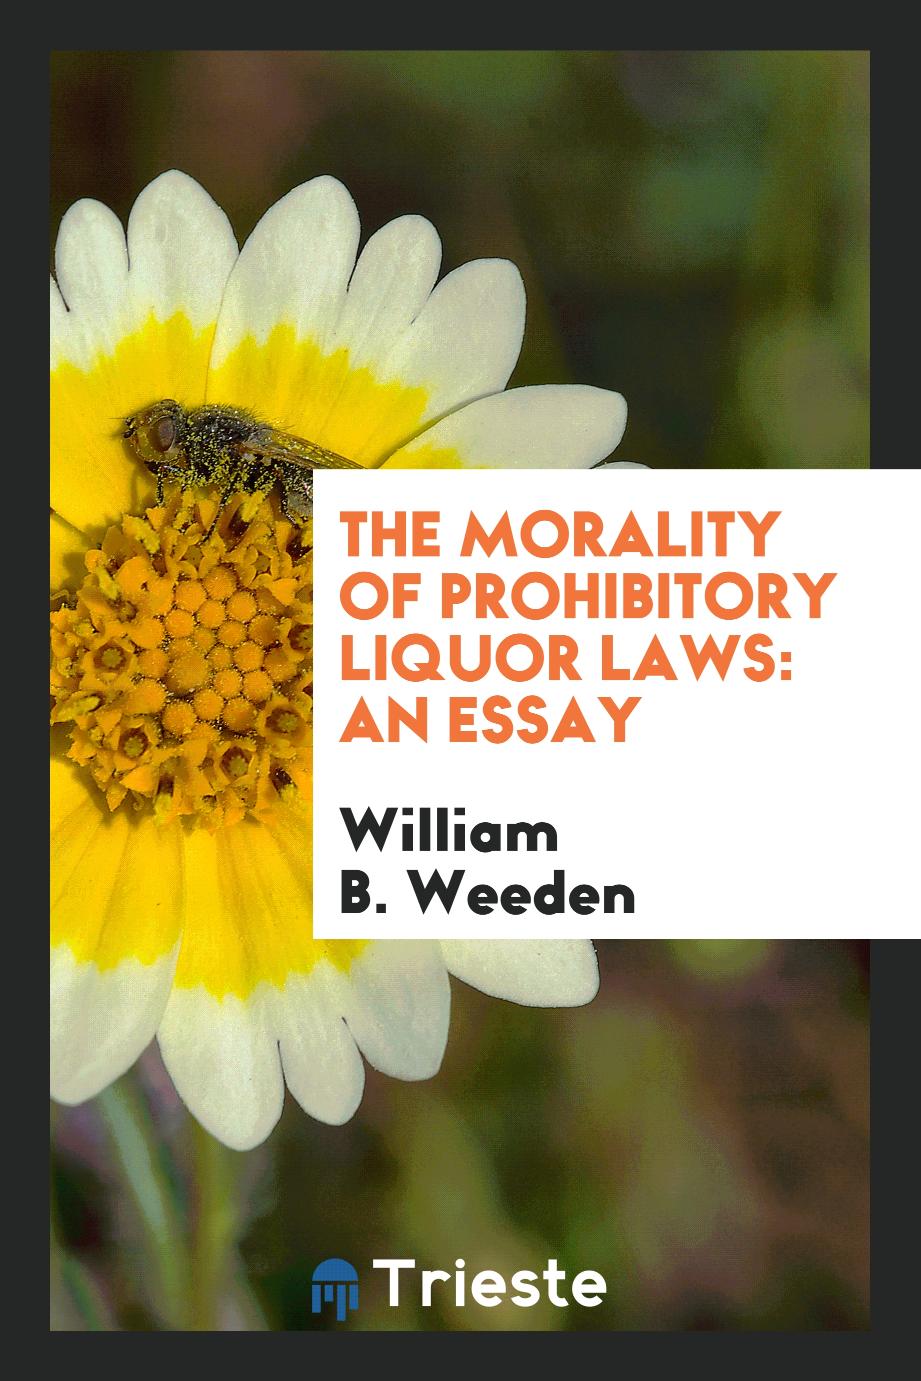 The morality of prohibitory liquor laws: an essay